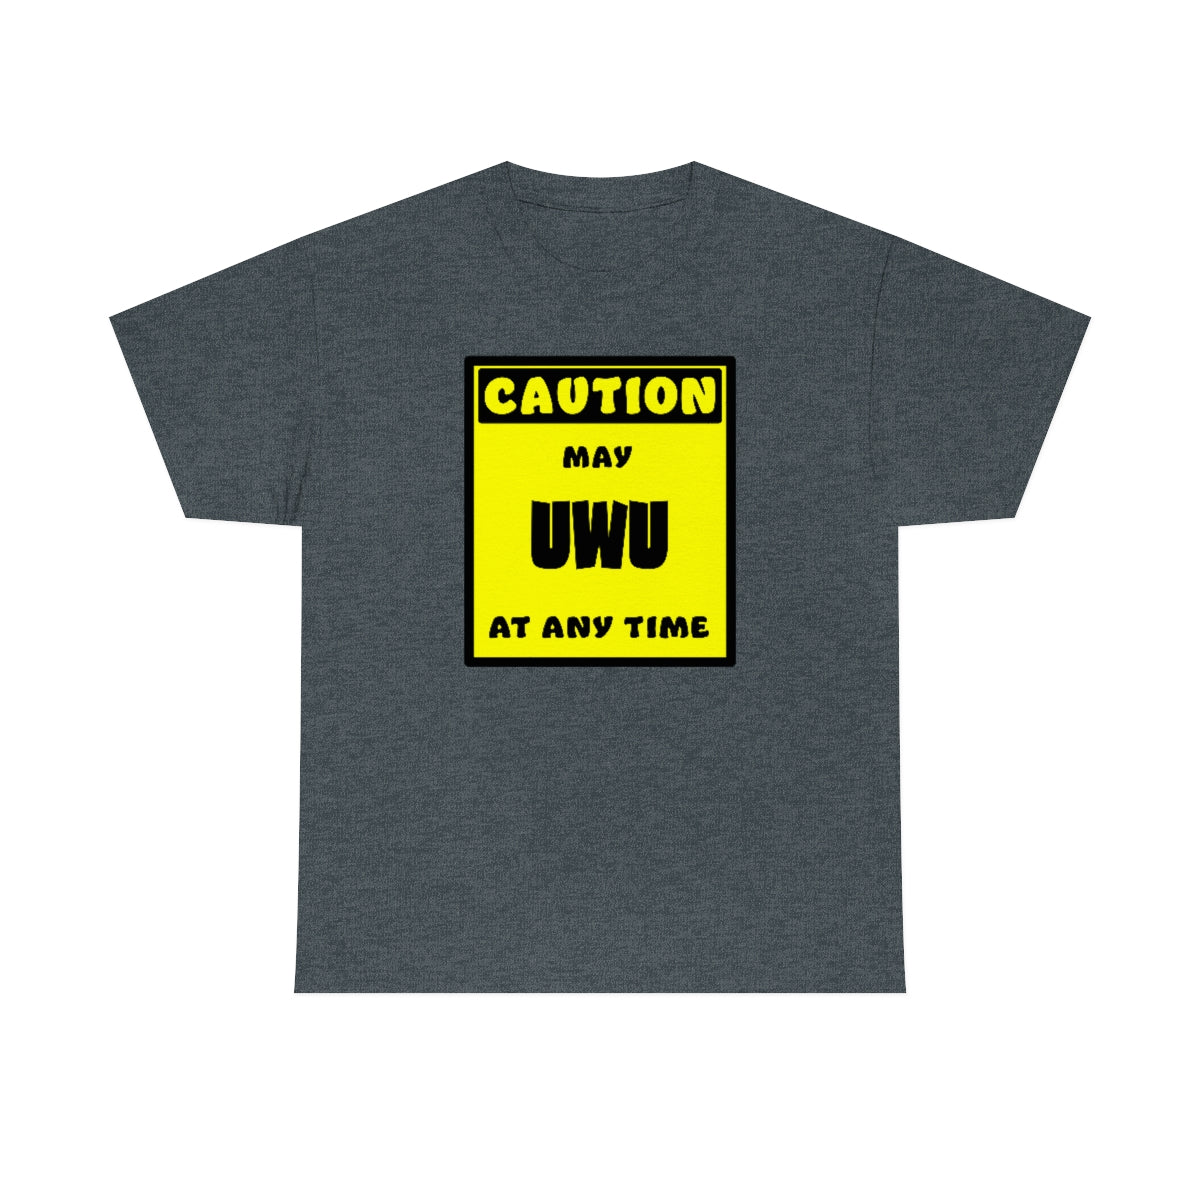 CAUTION! May UWU at any time! - T-Shirt T-Shirt AFLT-Whootorca Dark Heather S 